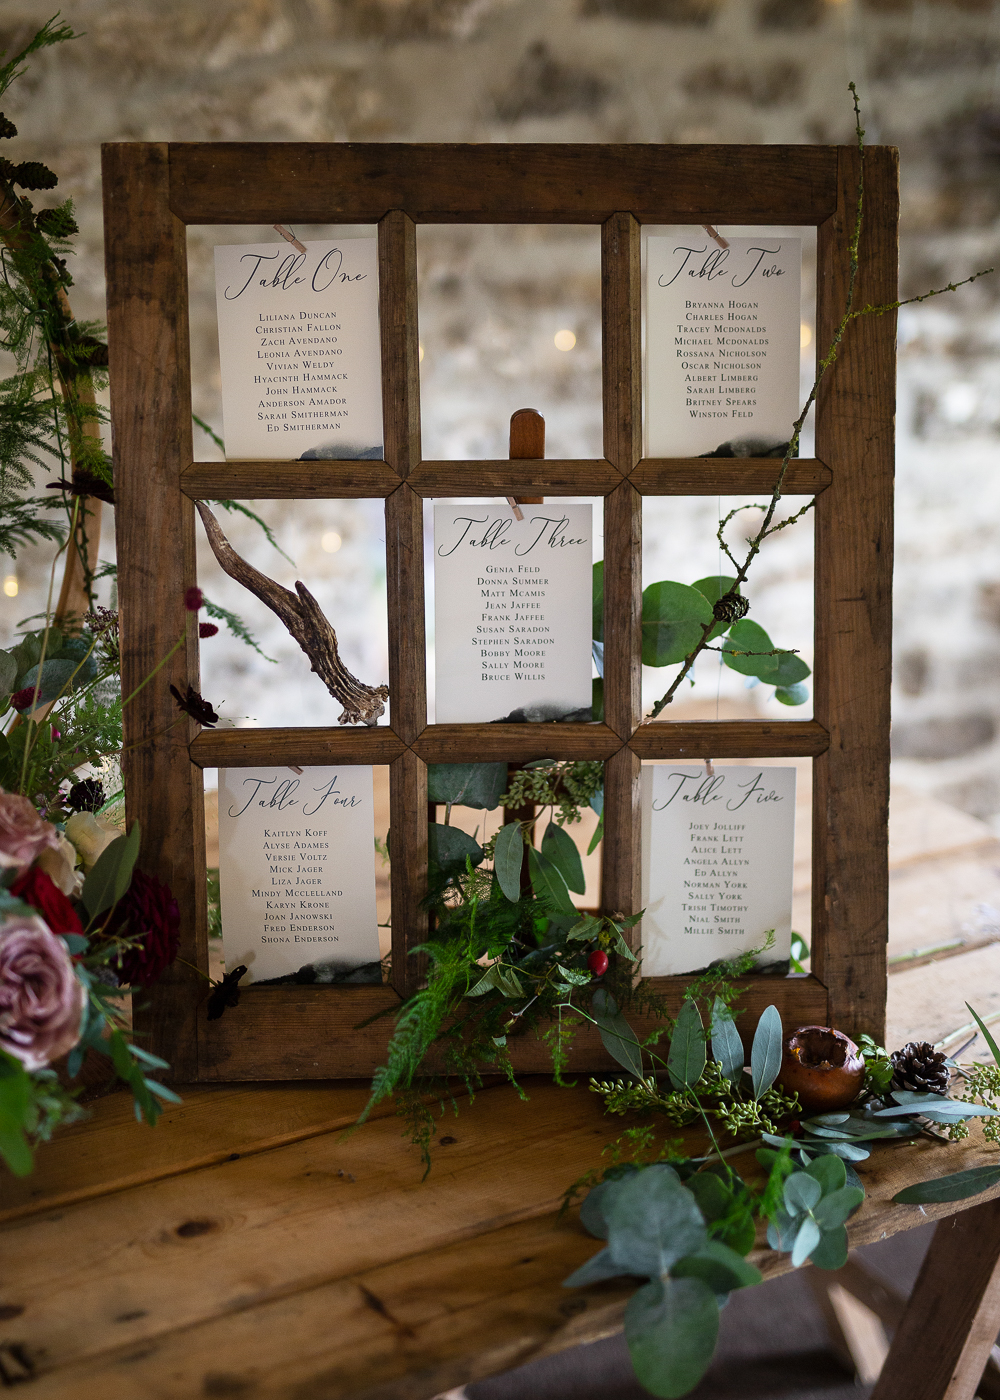 Whitewed Directory from the professionals blog on the seating plan stationery designers rustic wooden hanging frame